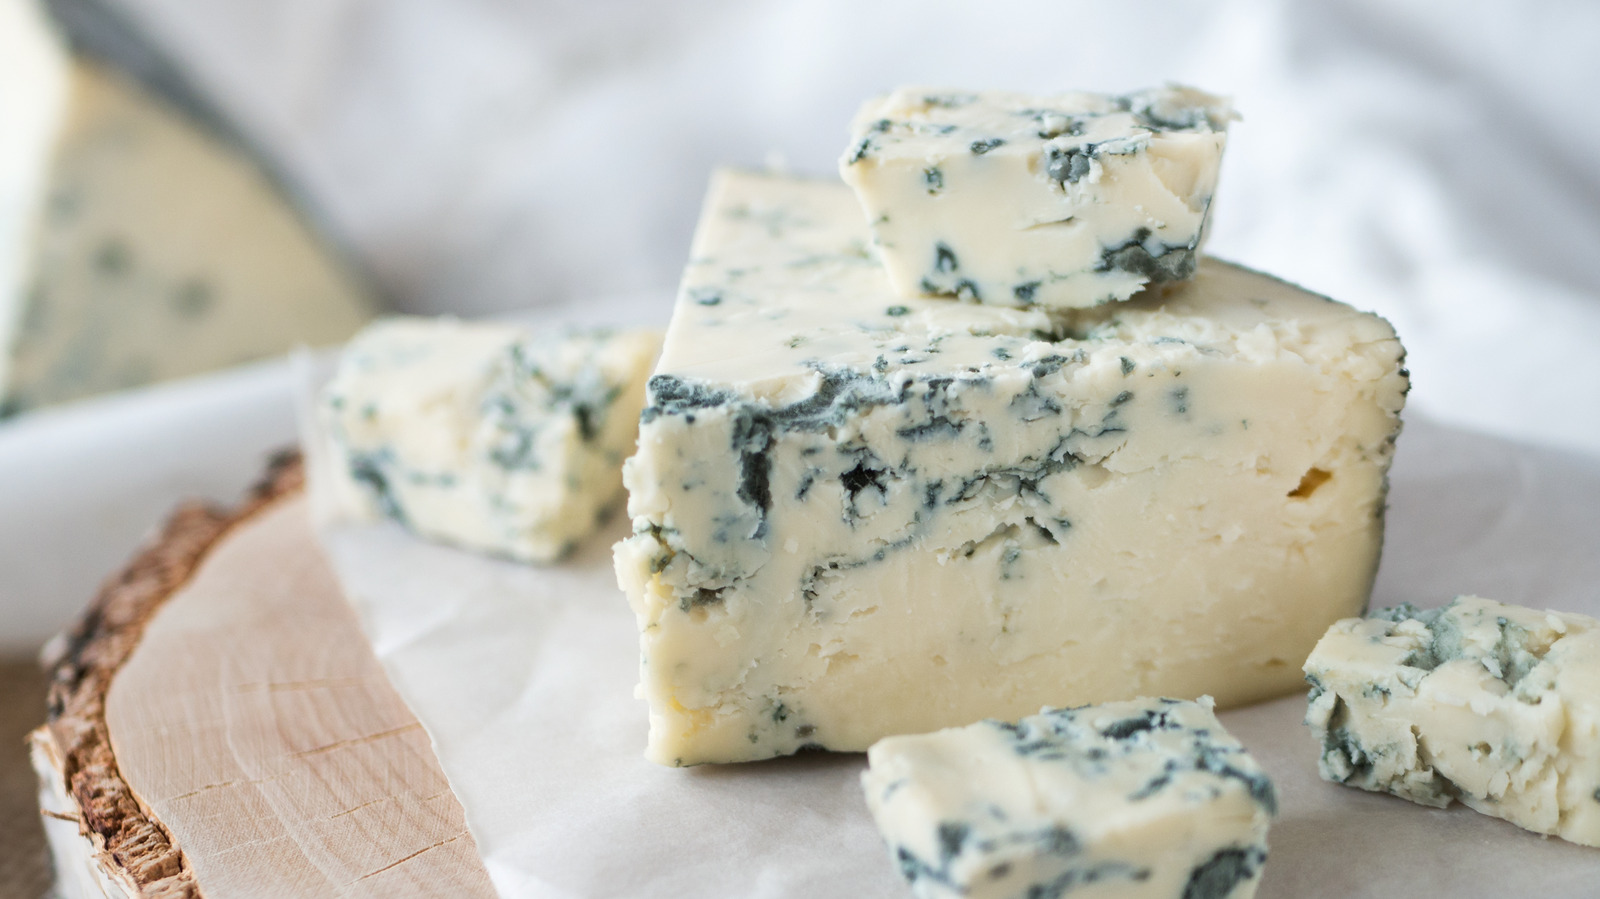 Blue Cheese vs. Gorgonzola: What's the Difference?